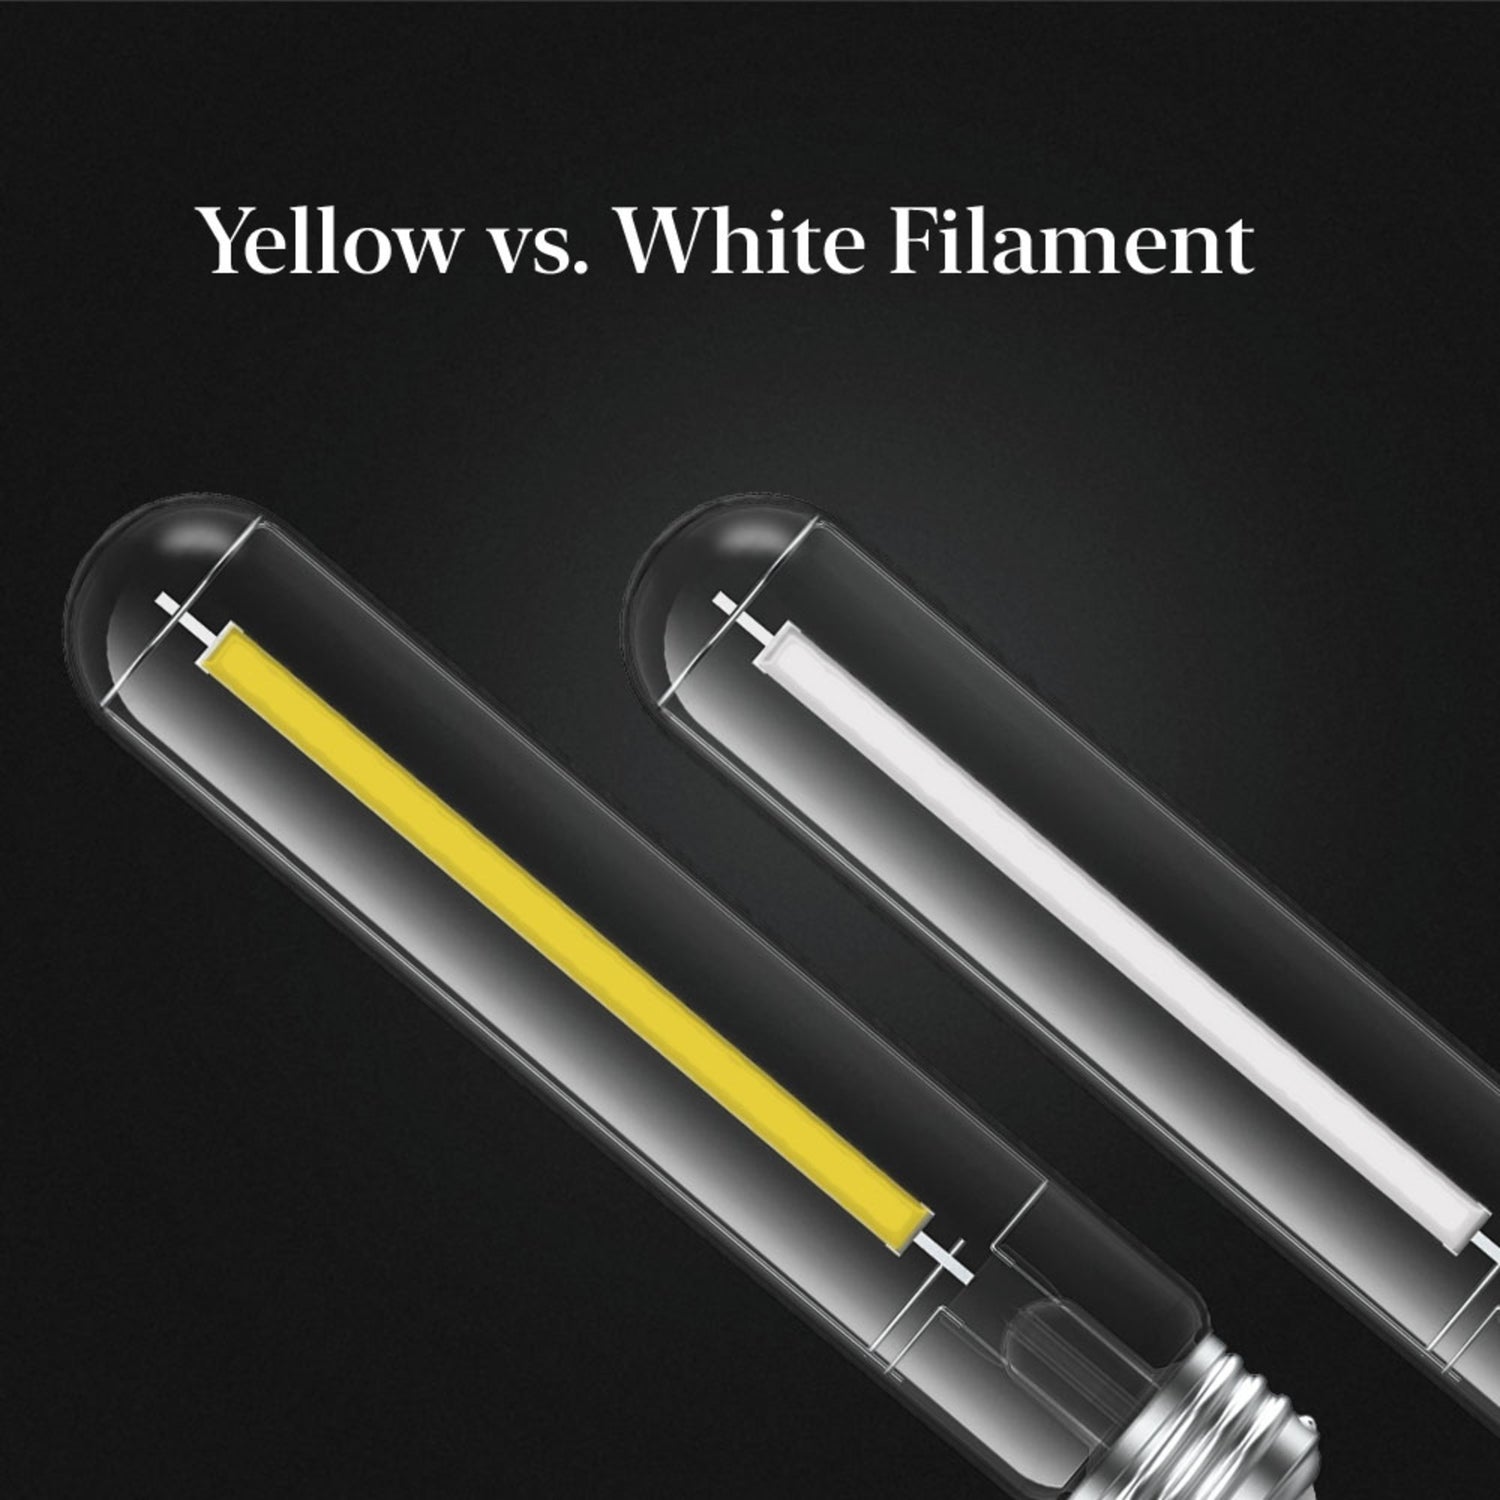 8.8W (60W Replacement) Daylight (5000K) E26 Base T10 Exposed White Filament LED (4-Pack)